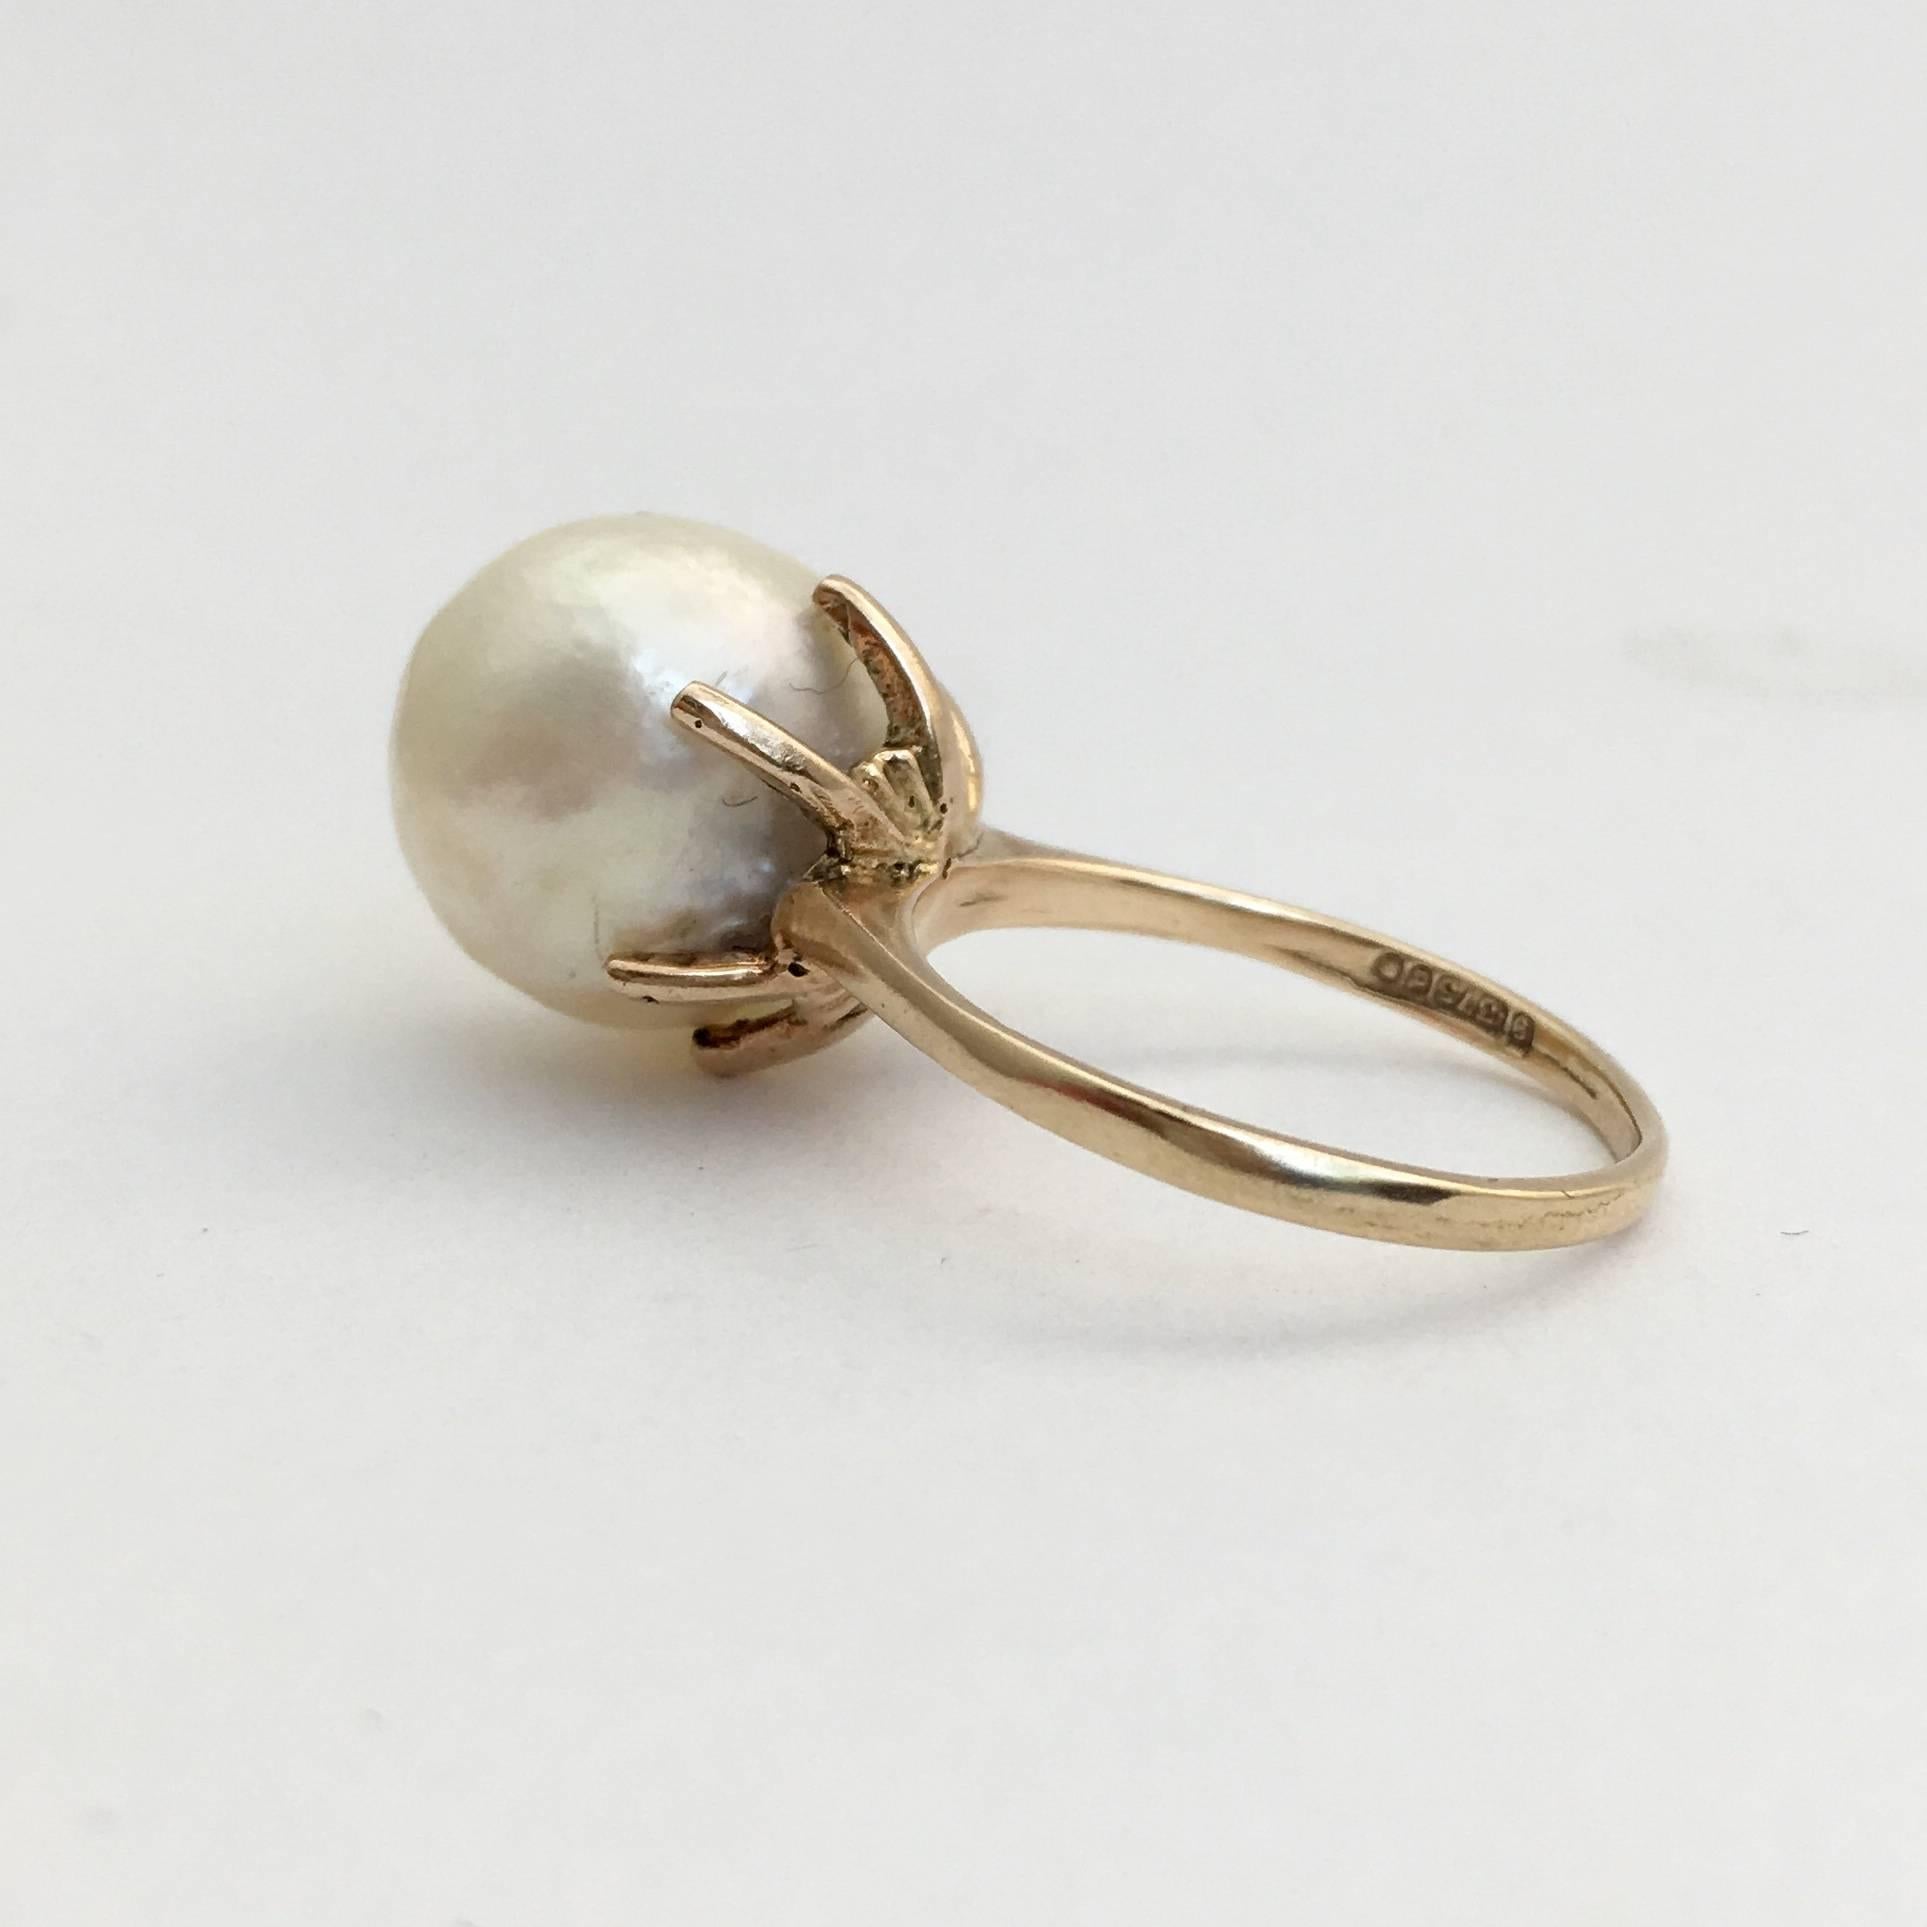 1950s Cocktail Ring Large Baroque Pearl English Midcentury Gold Vintage Jewelry In Good Condition For Sale In London, GB